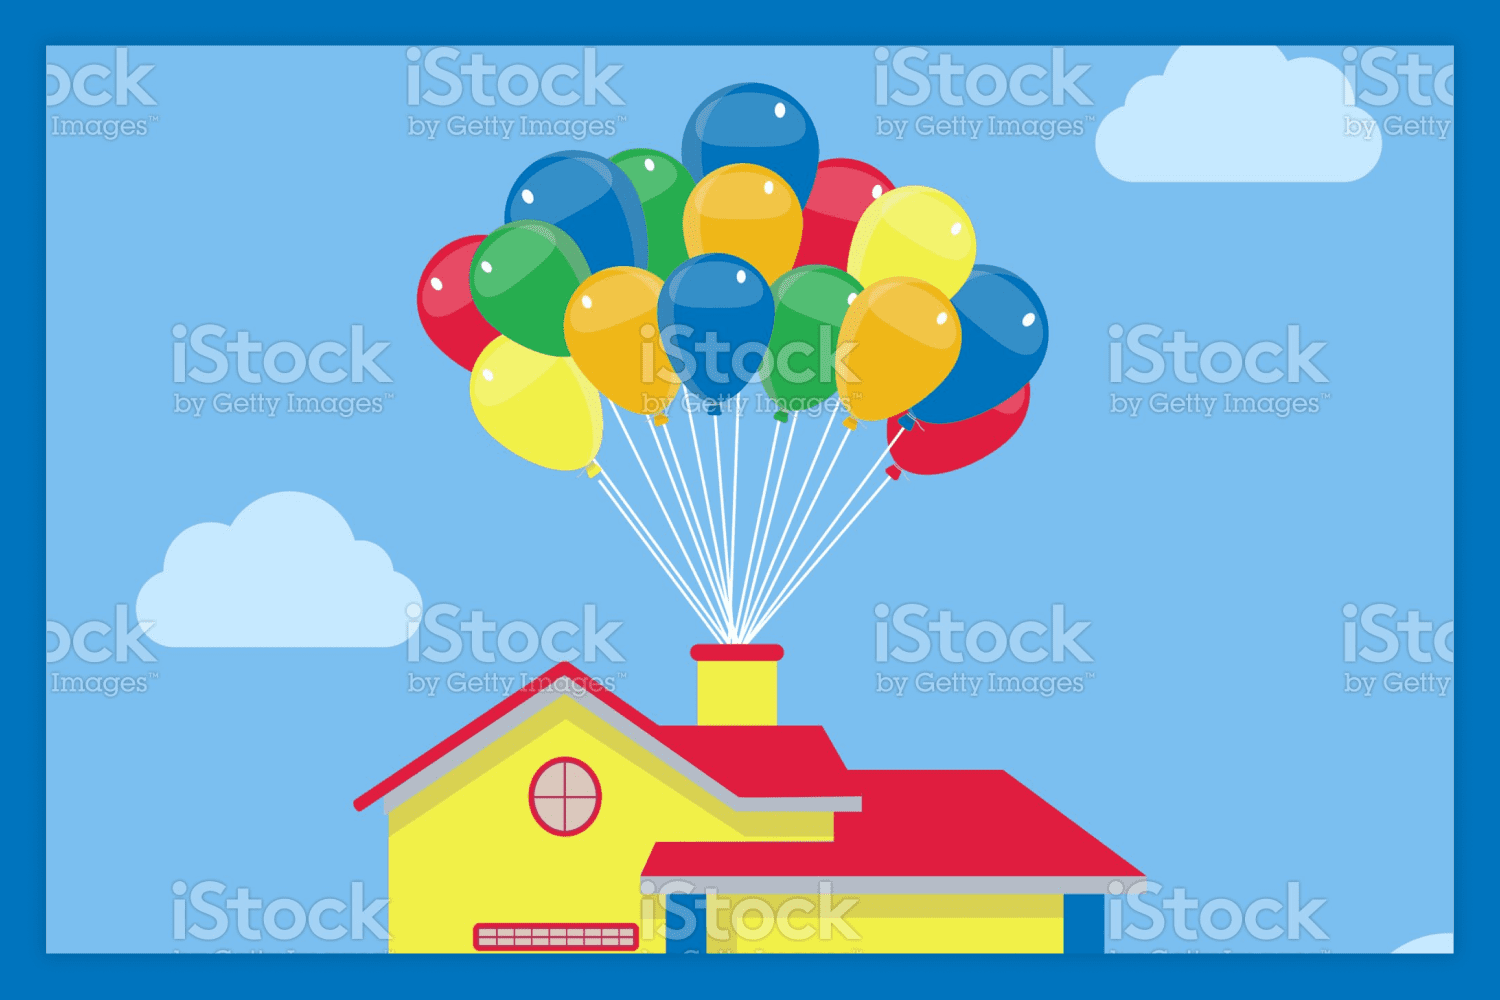 88 house flying with balloons 340